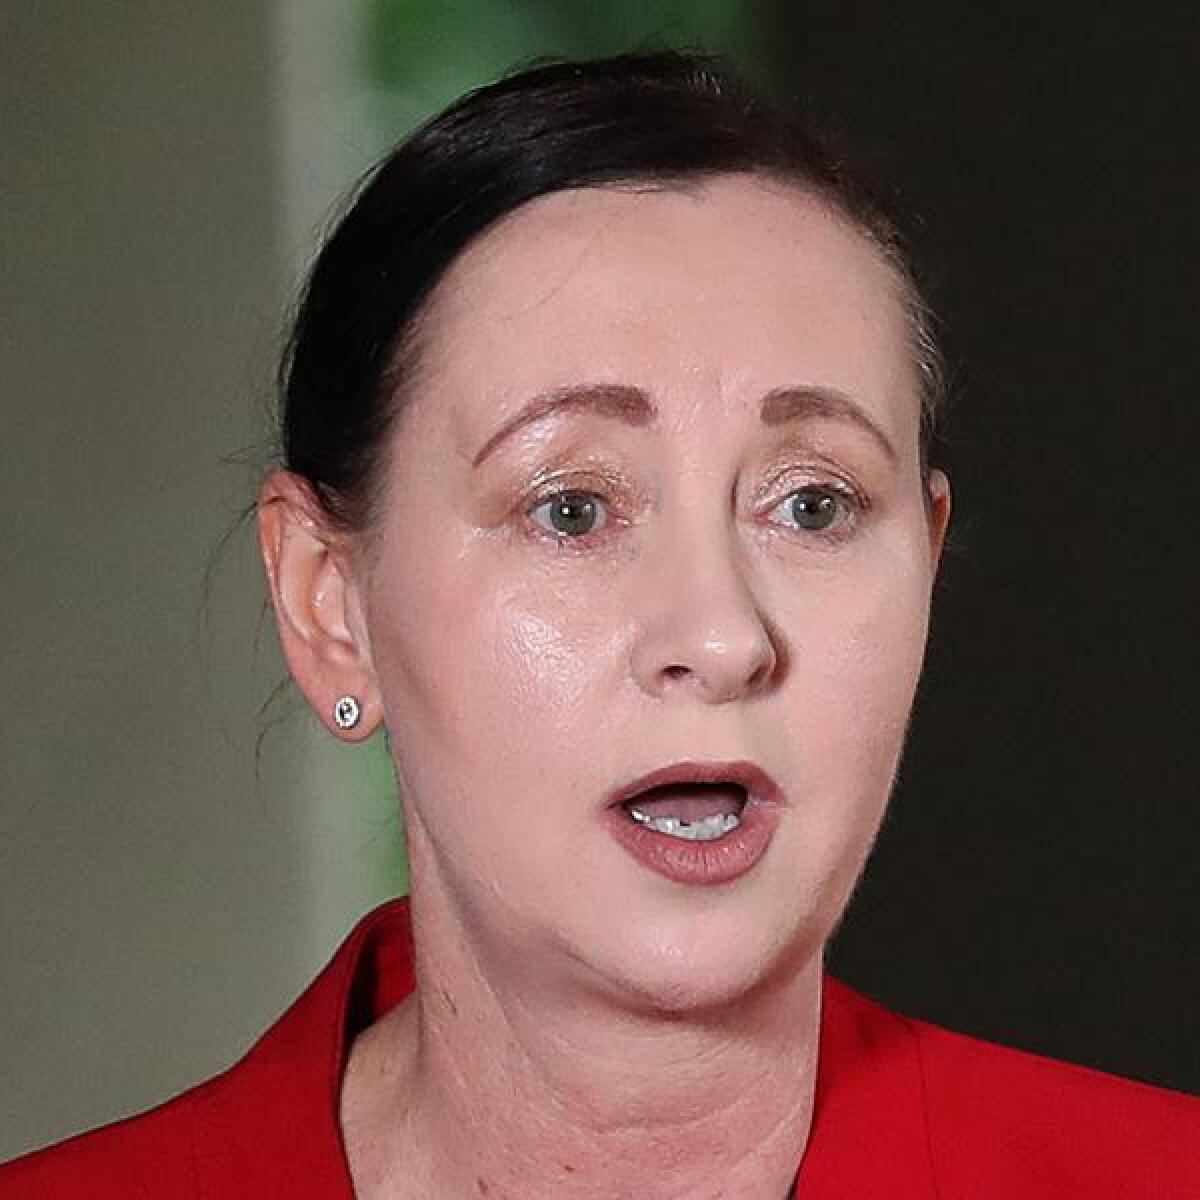 Queensland Health Minister Yvette D'Ath